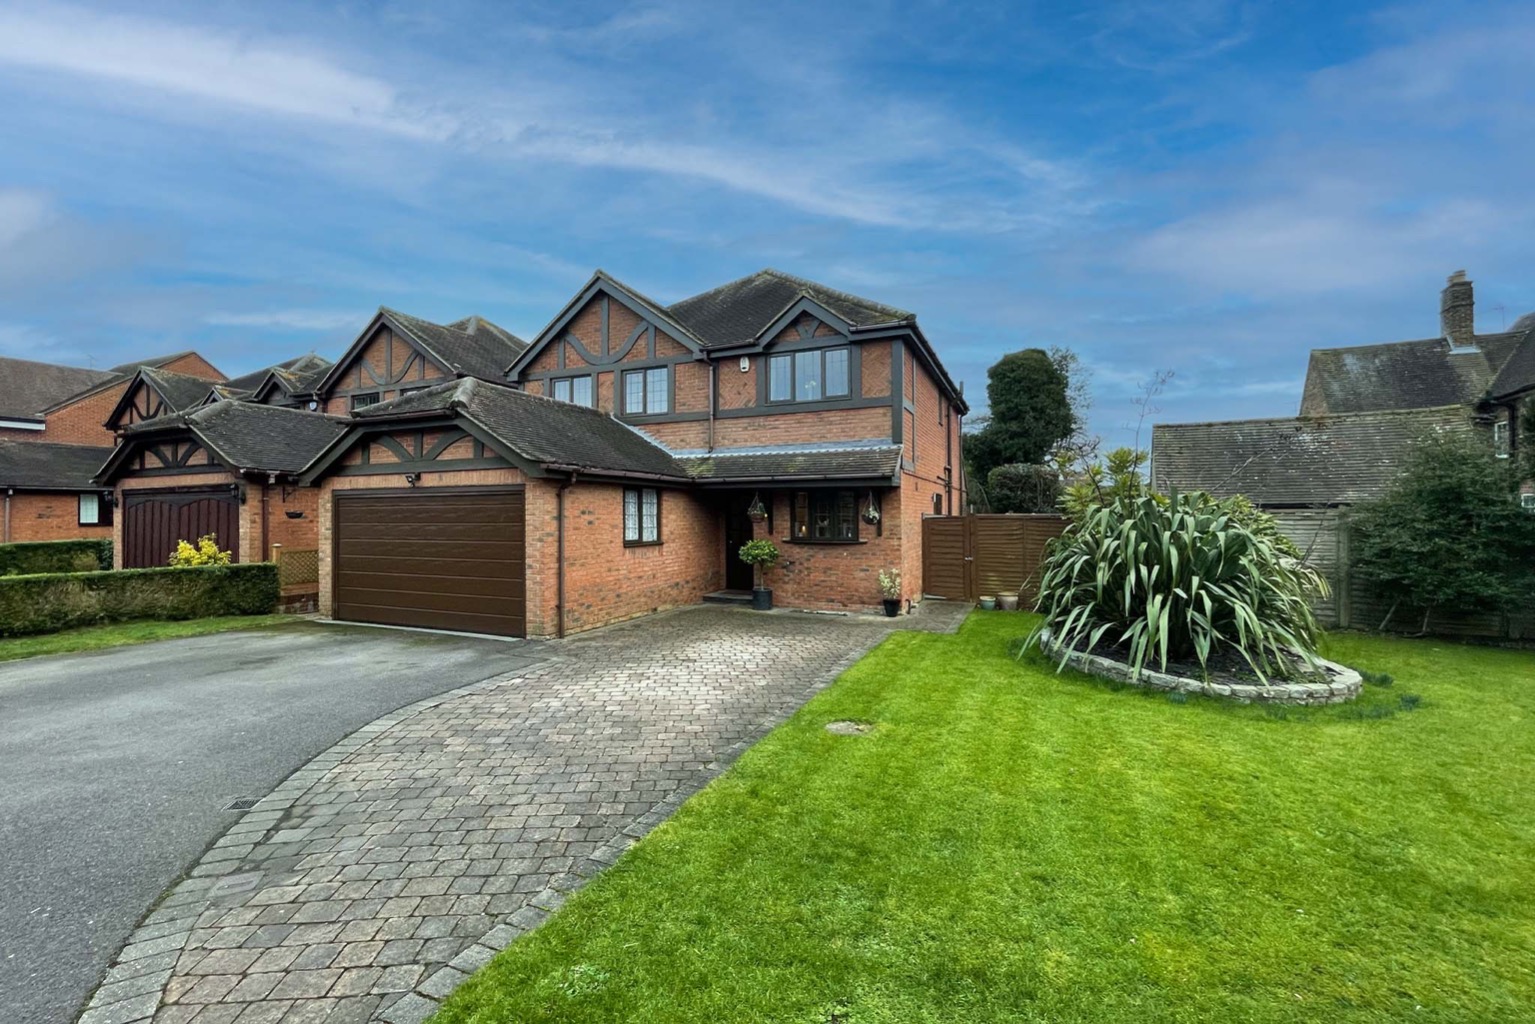 **CHECK OUT THE PROPERTY VIDEO** A stunning family home on a private road in the village of Holmer Green.  Internally the home is beautifully presented and offers a downstairs cloakroom, study, kitchen, separate utility room and a  huge open plan living area to the rear.